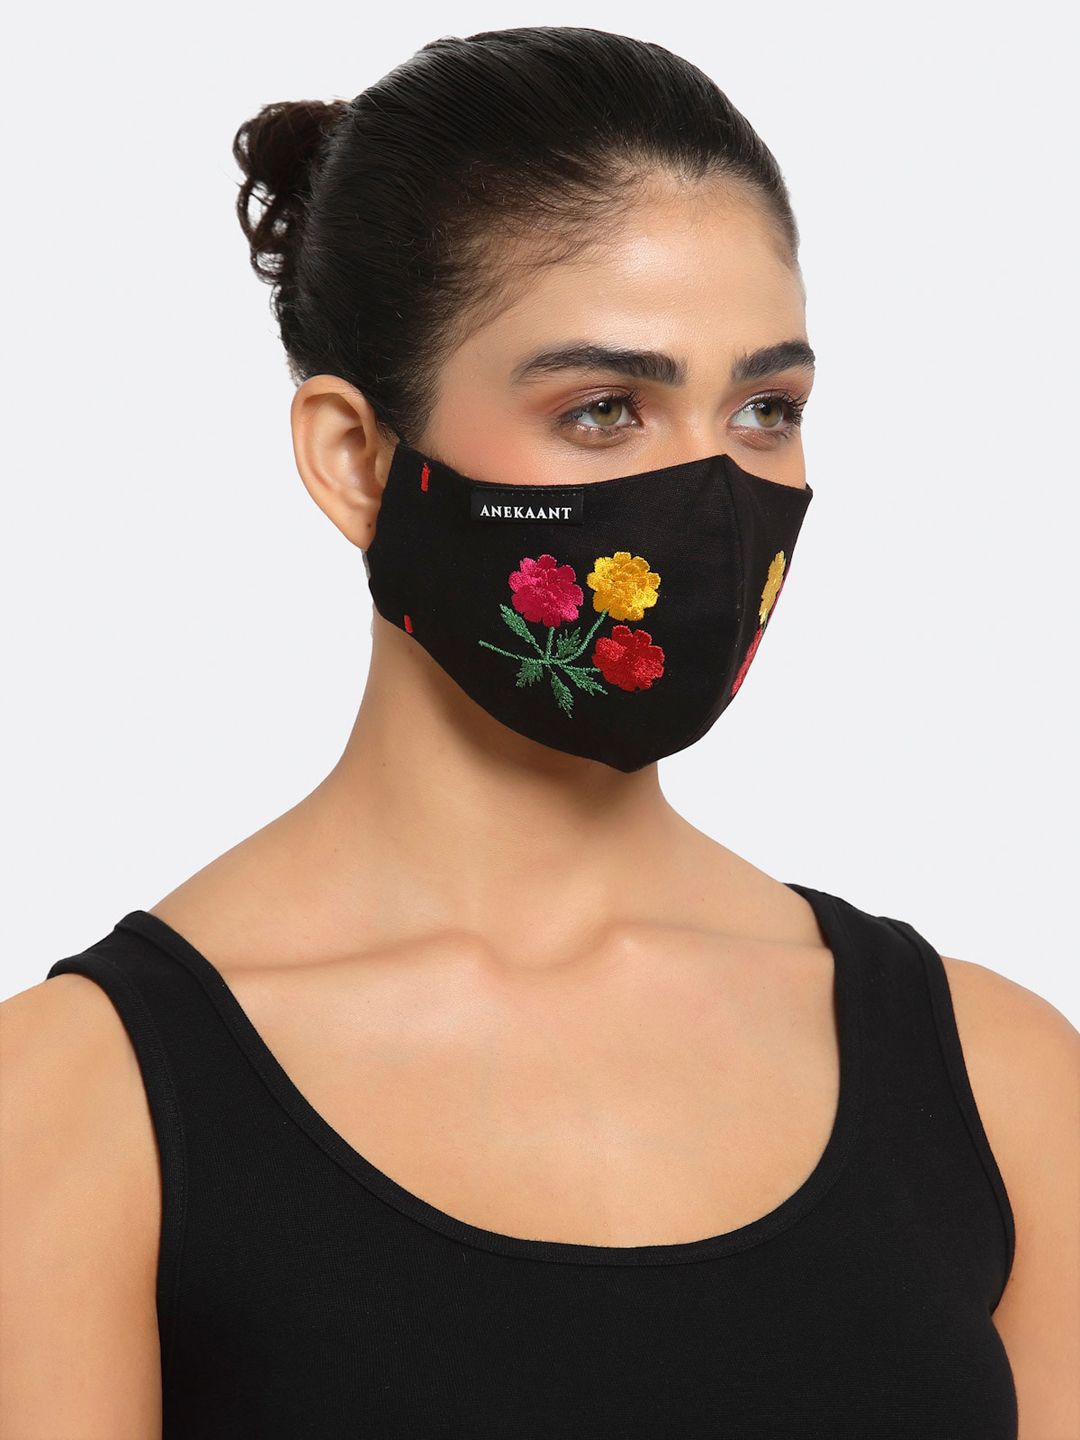 Anekaant Women Black Embroidered 3-Ply Cotton Designer Mask Price in India